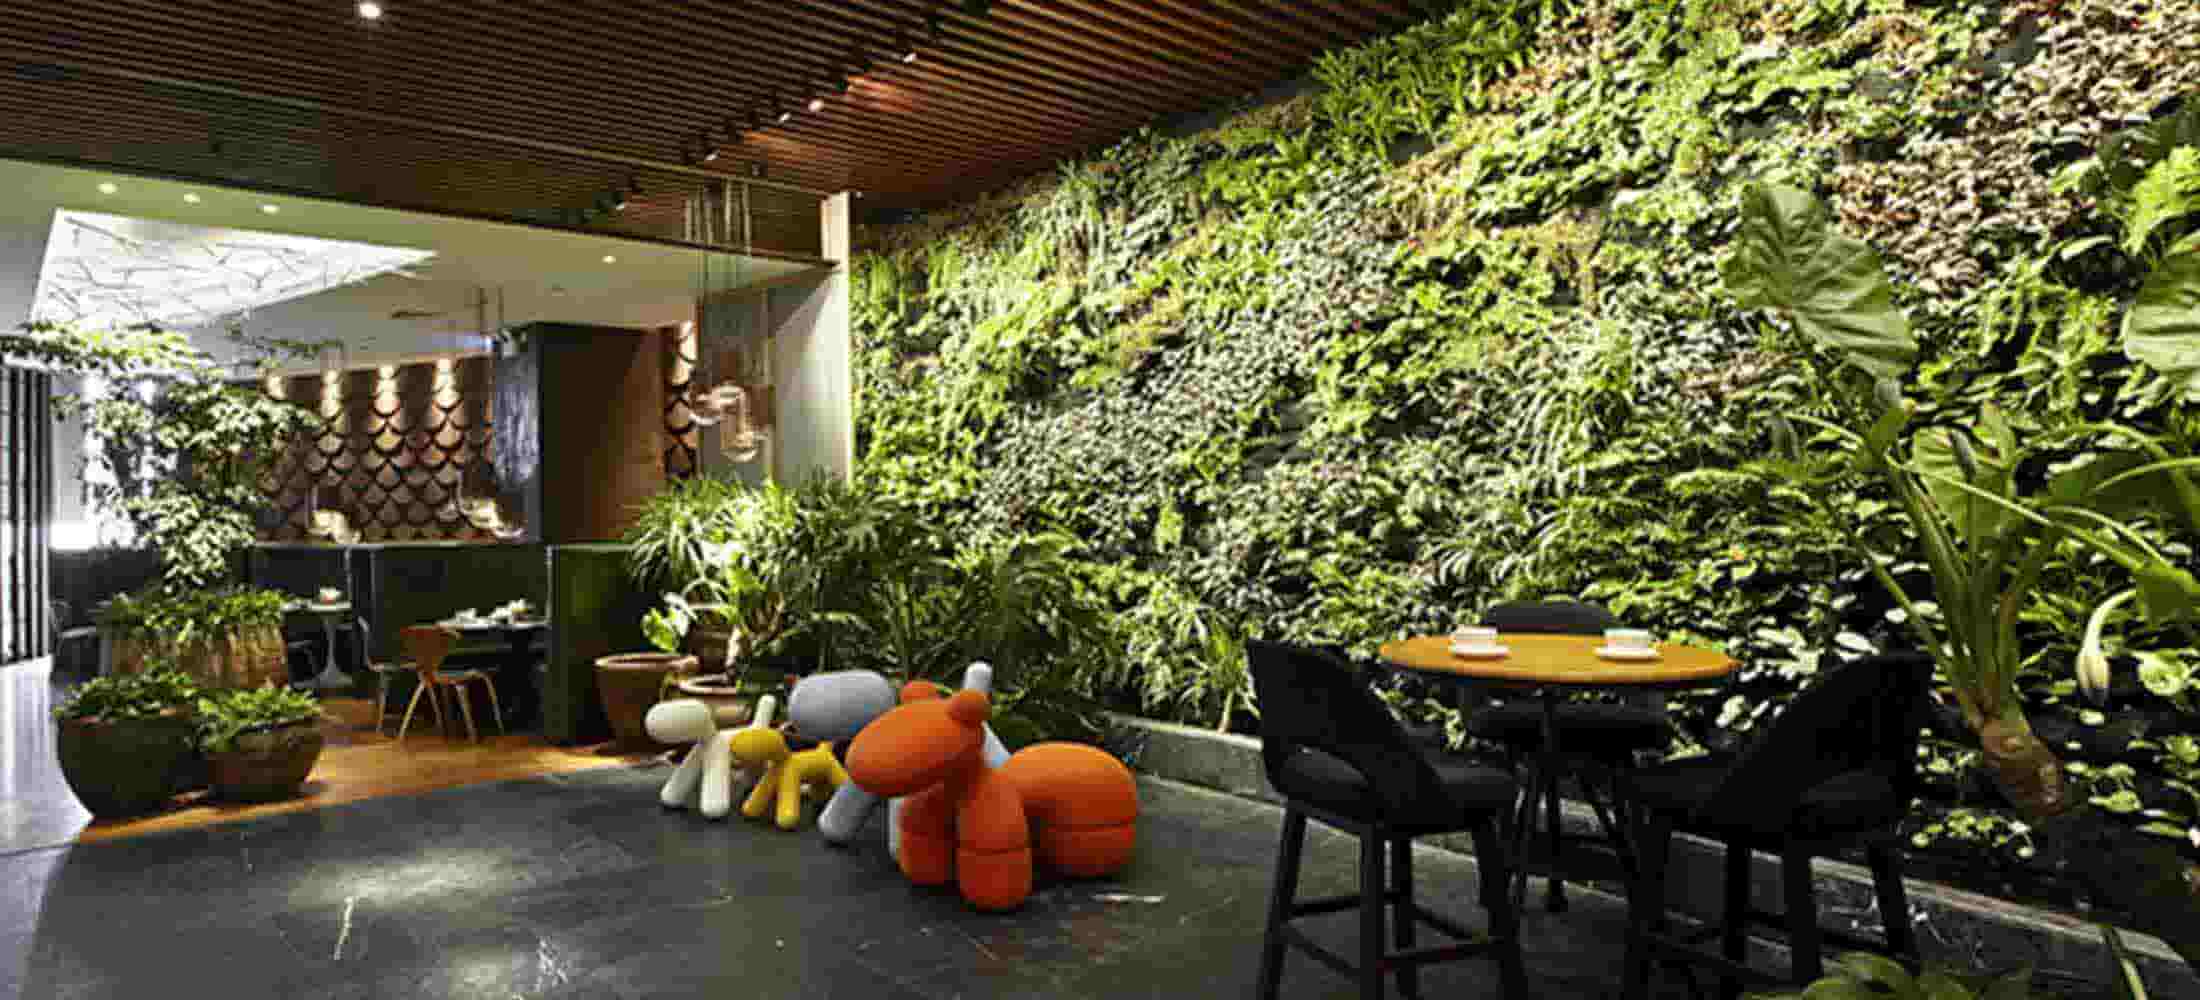 hotels check in to greener thinking